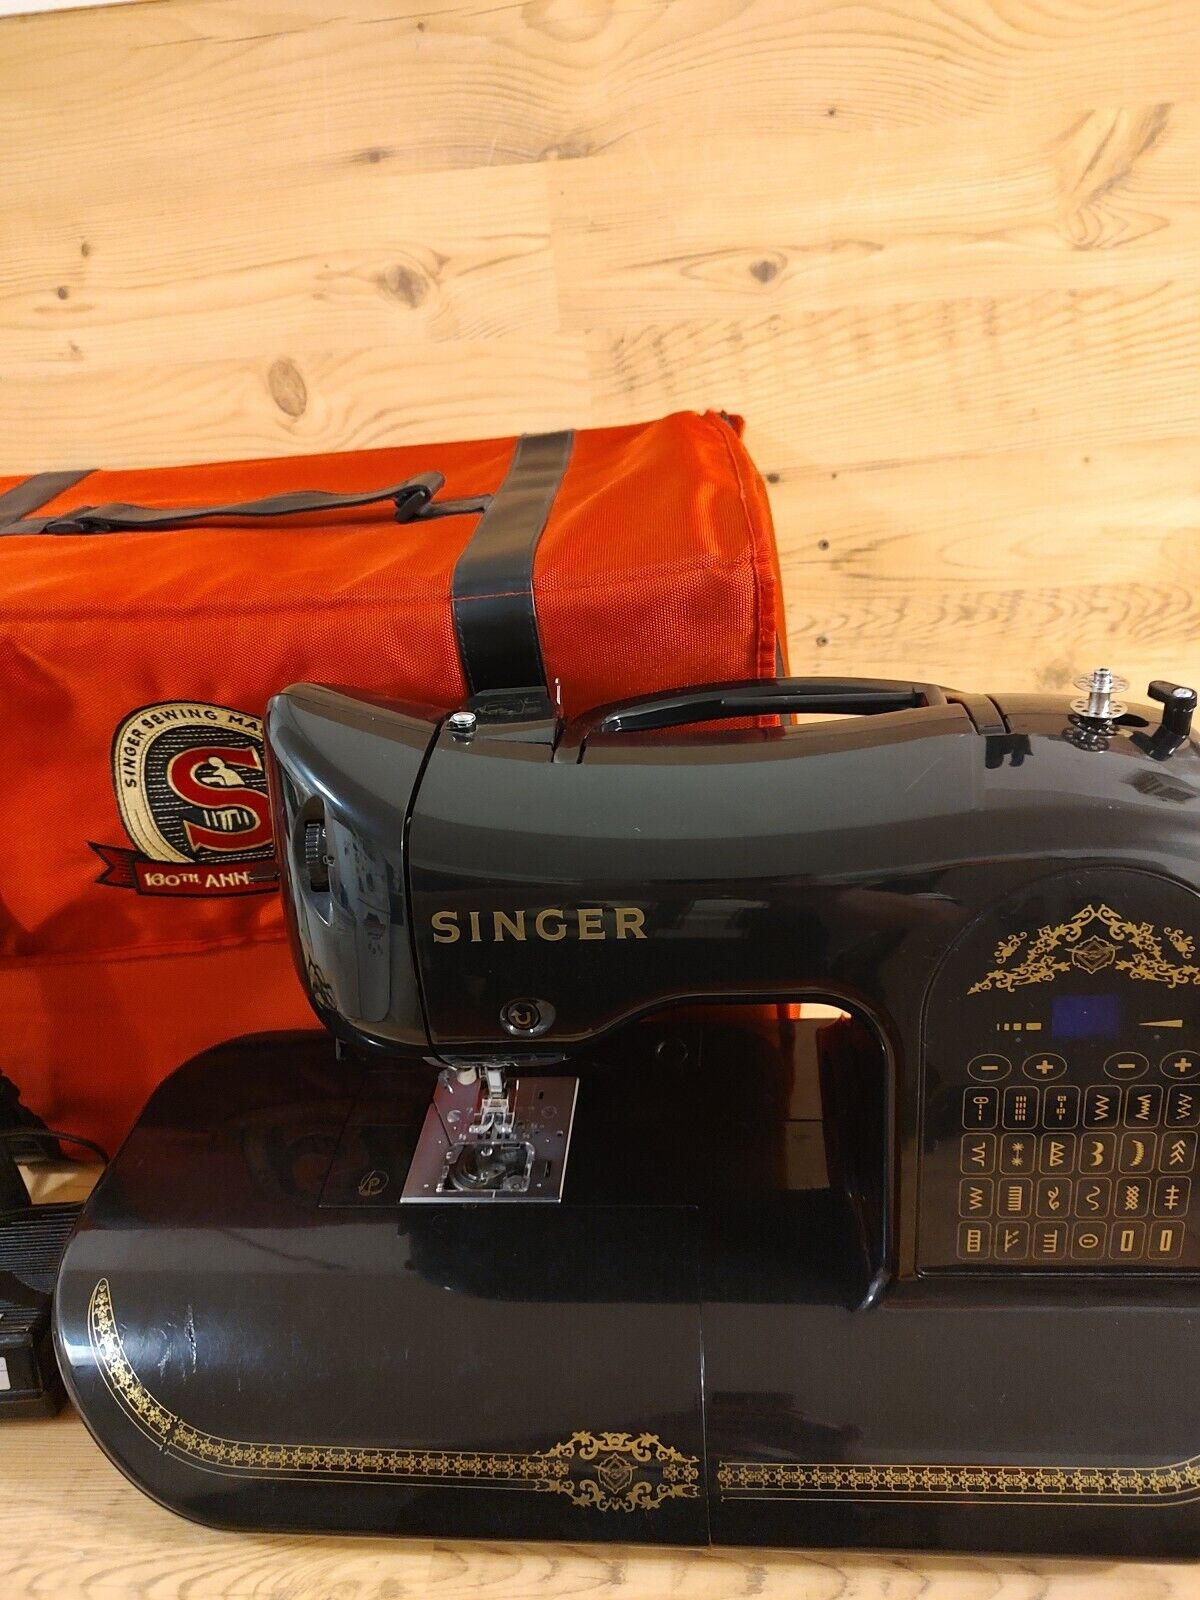 Singer 160th Anniversary Sewing Machine With Bag